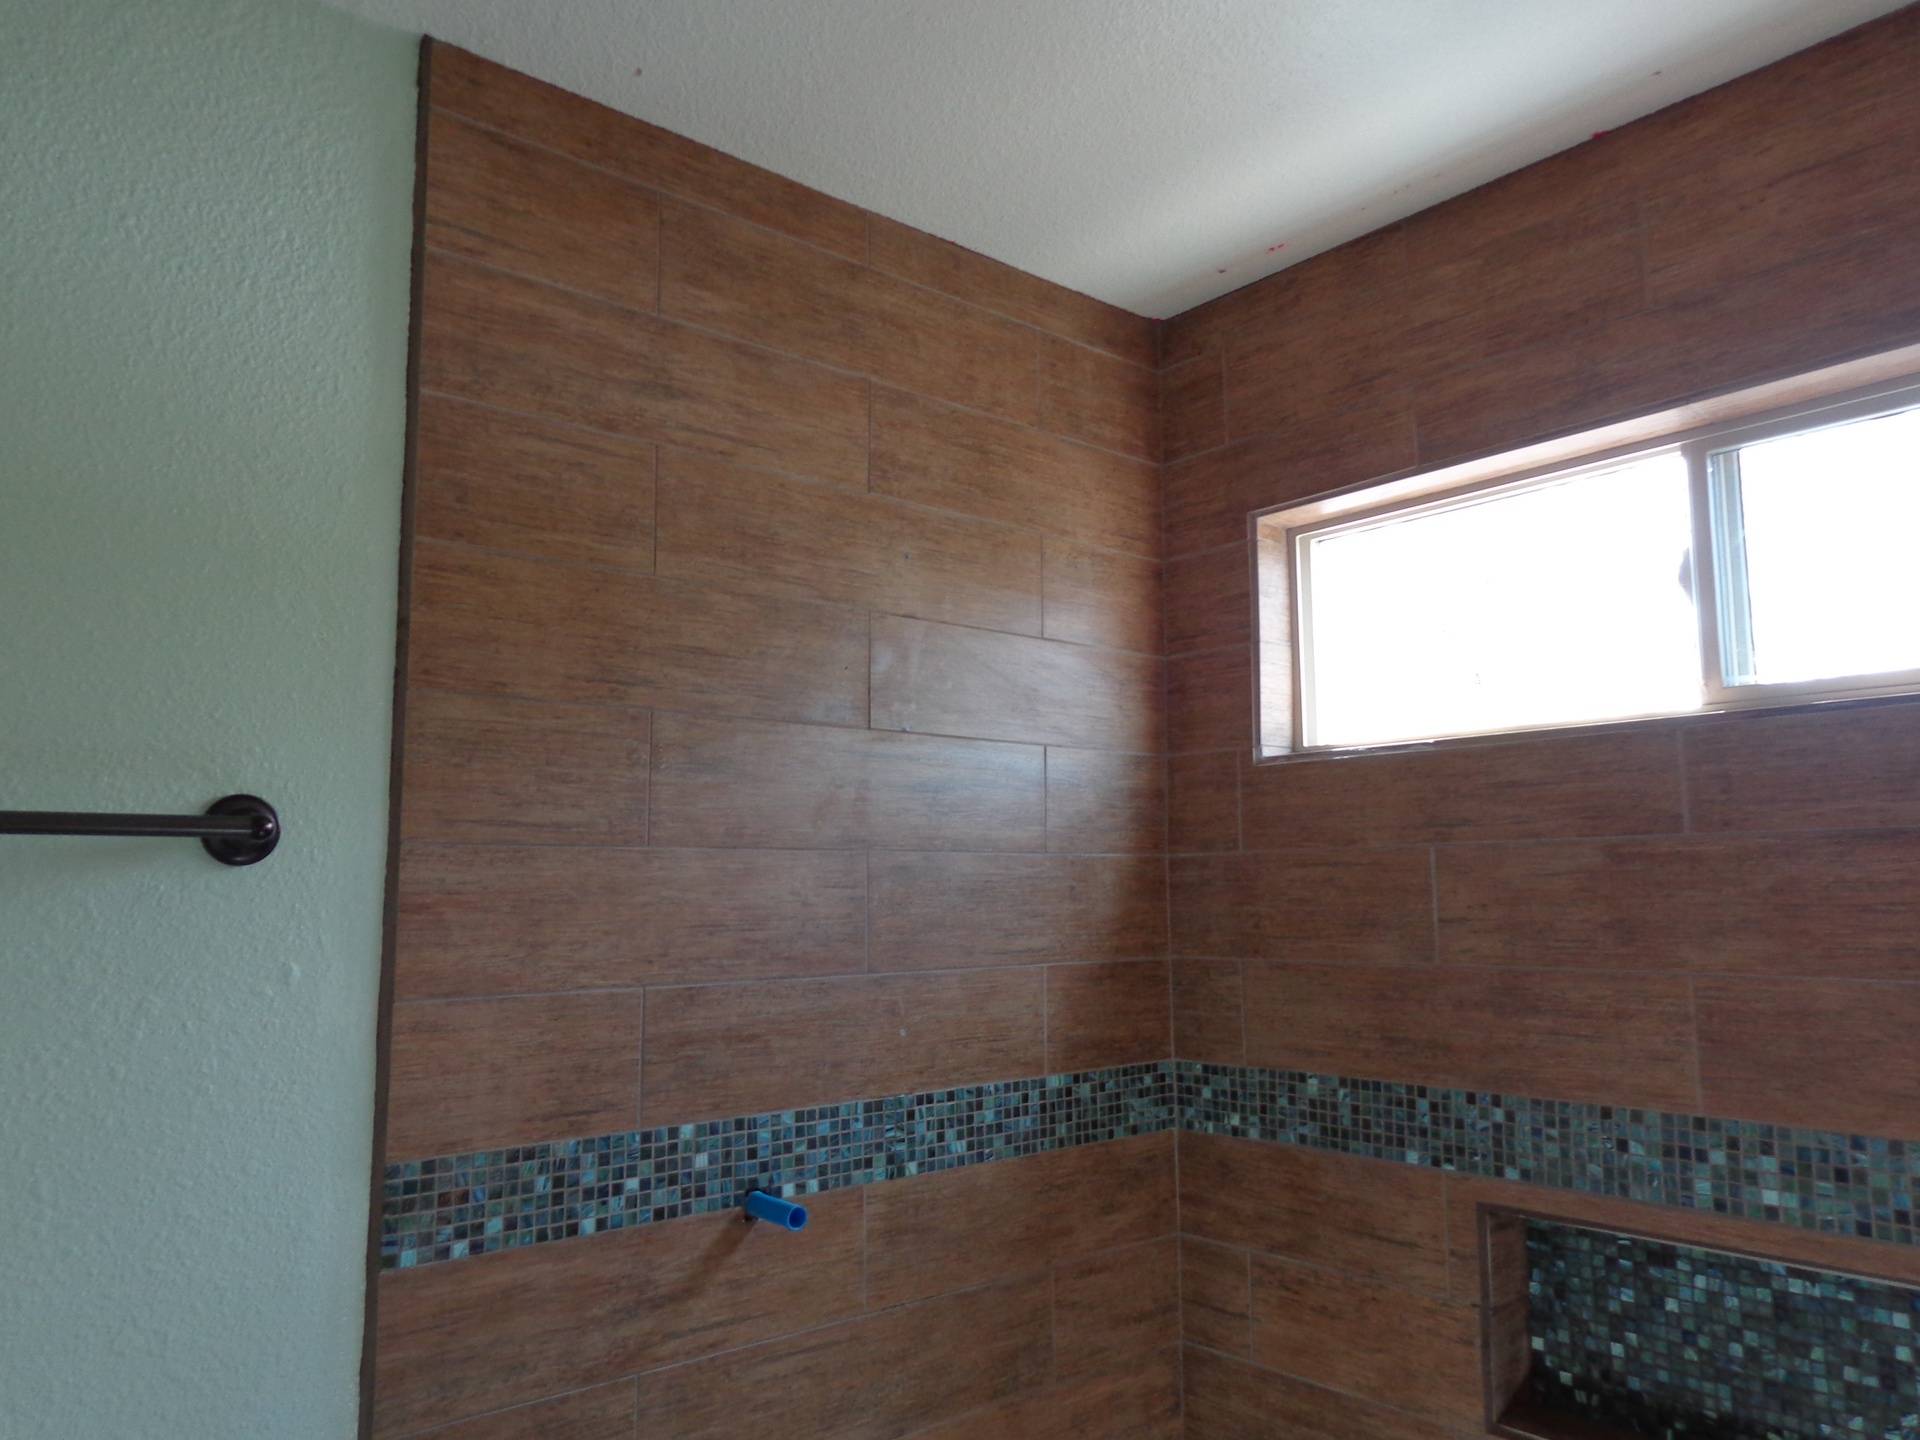 Master bathroom tile with deco band